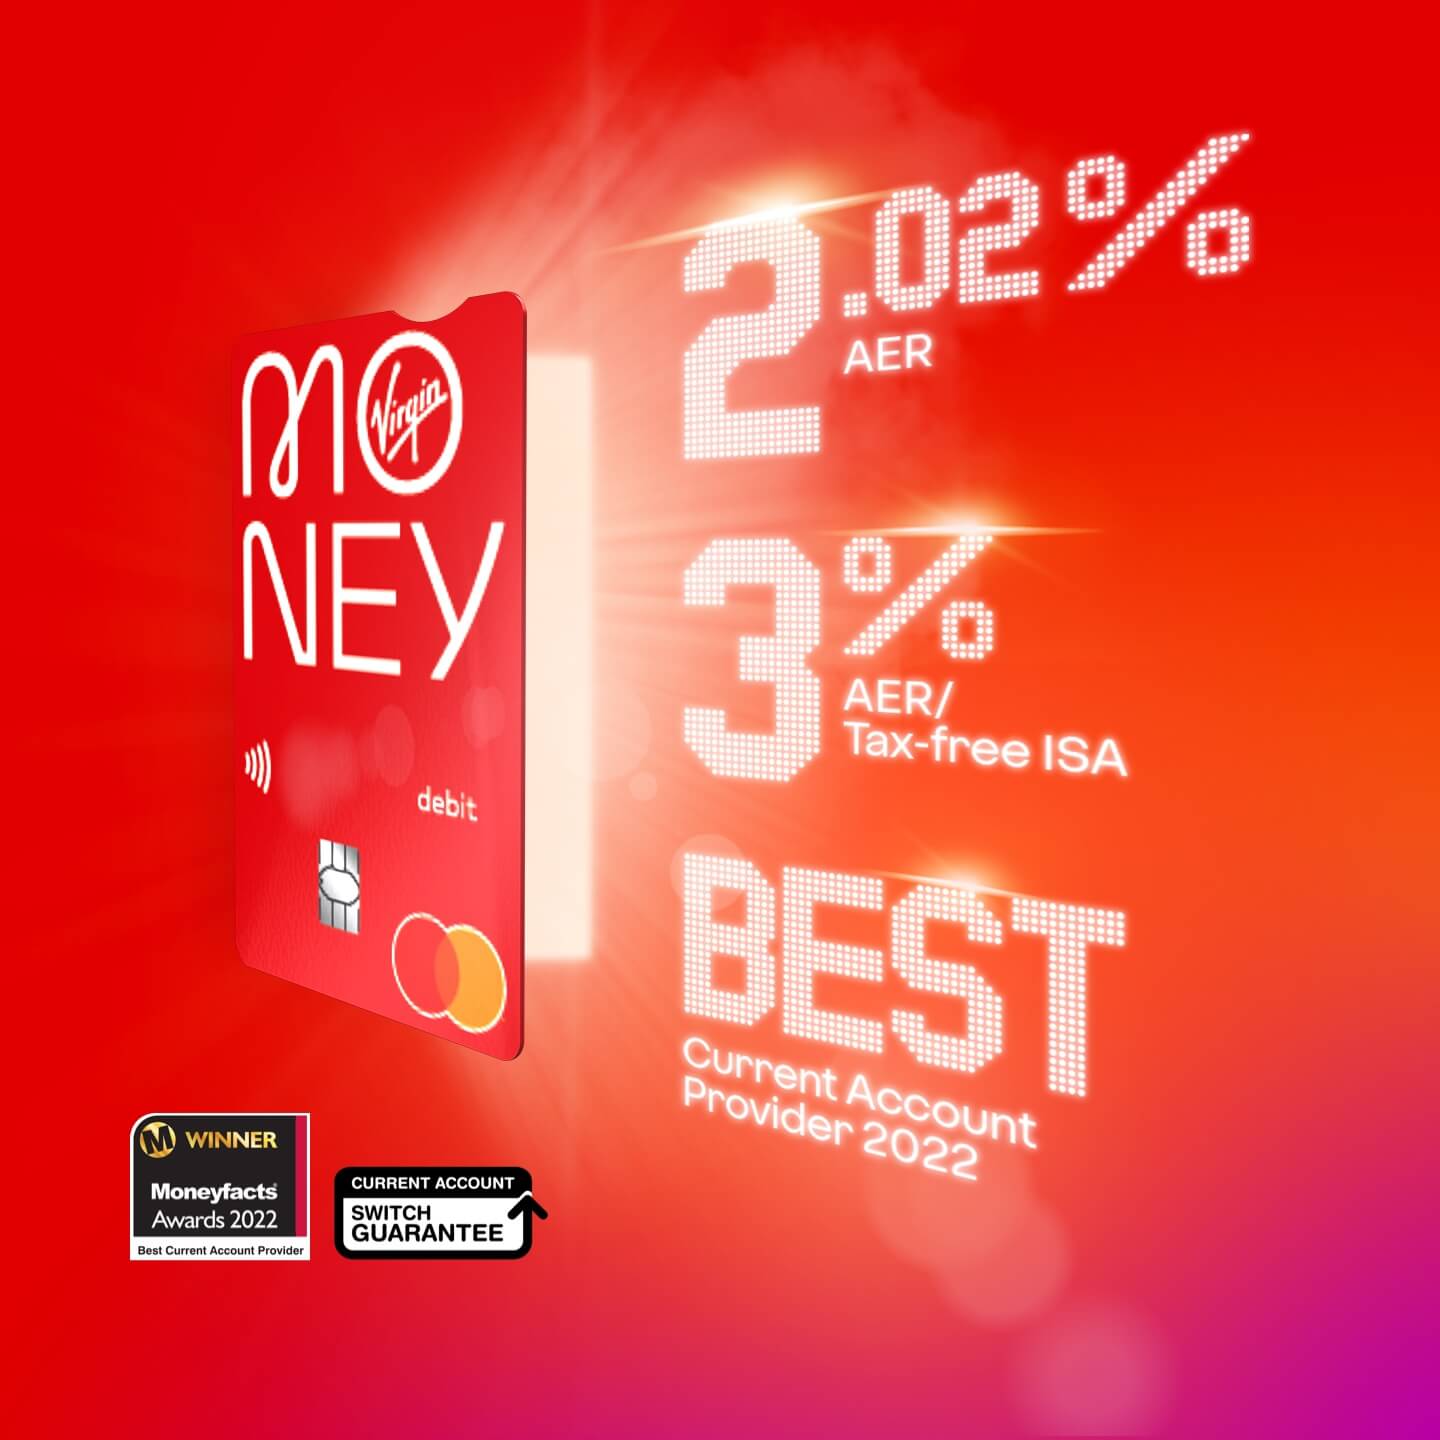 Monefects award: Best current account provider 2022. Switching your bank account to Virgin Money is all backed by the current account switch guarantee.